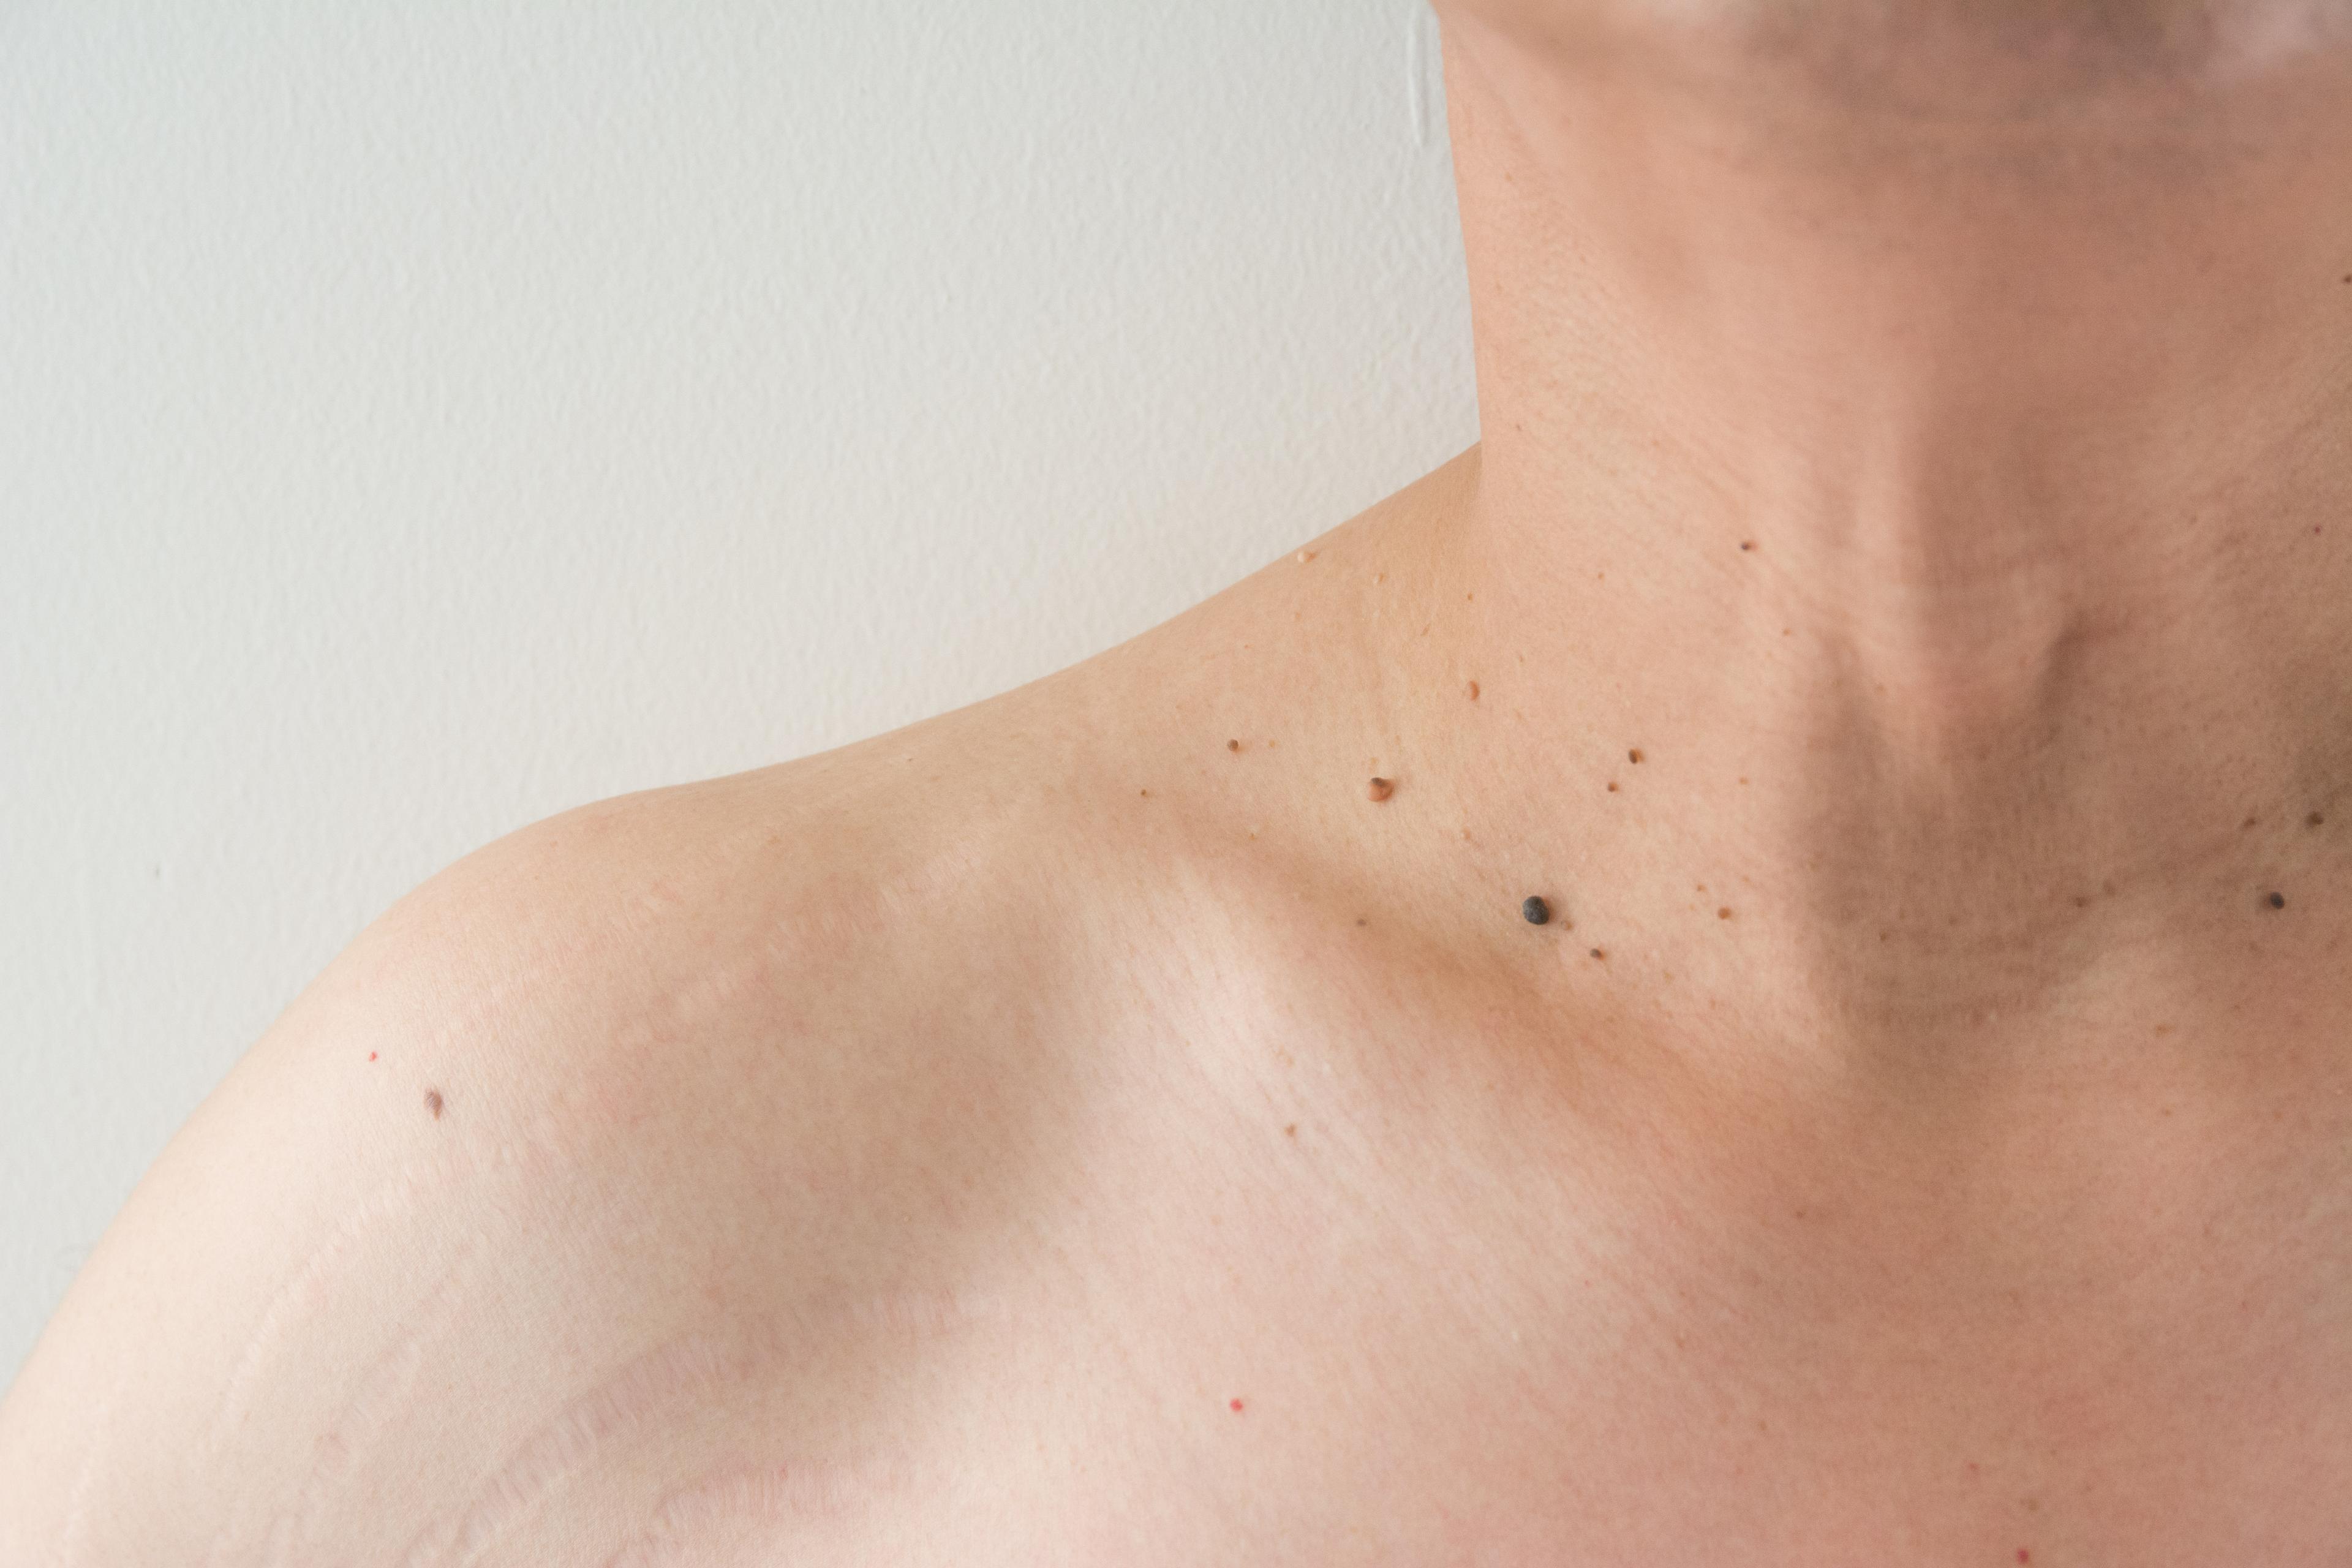 What are skin tags and warts